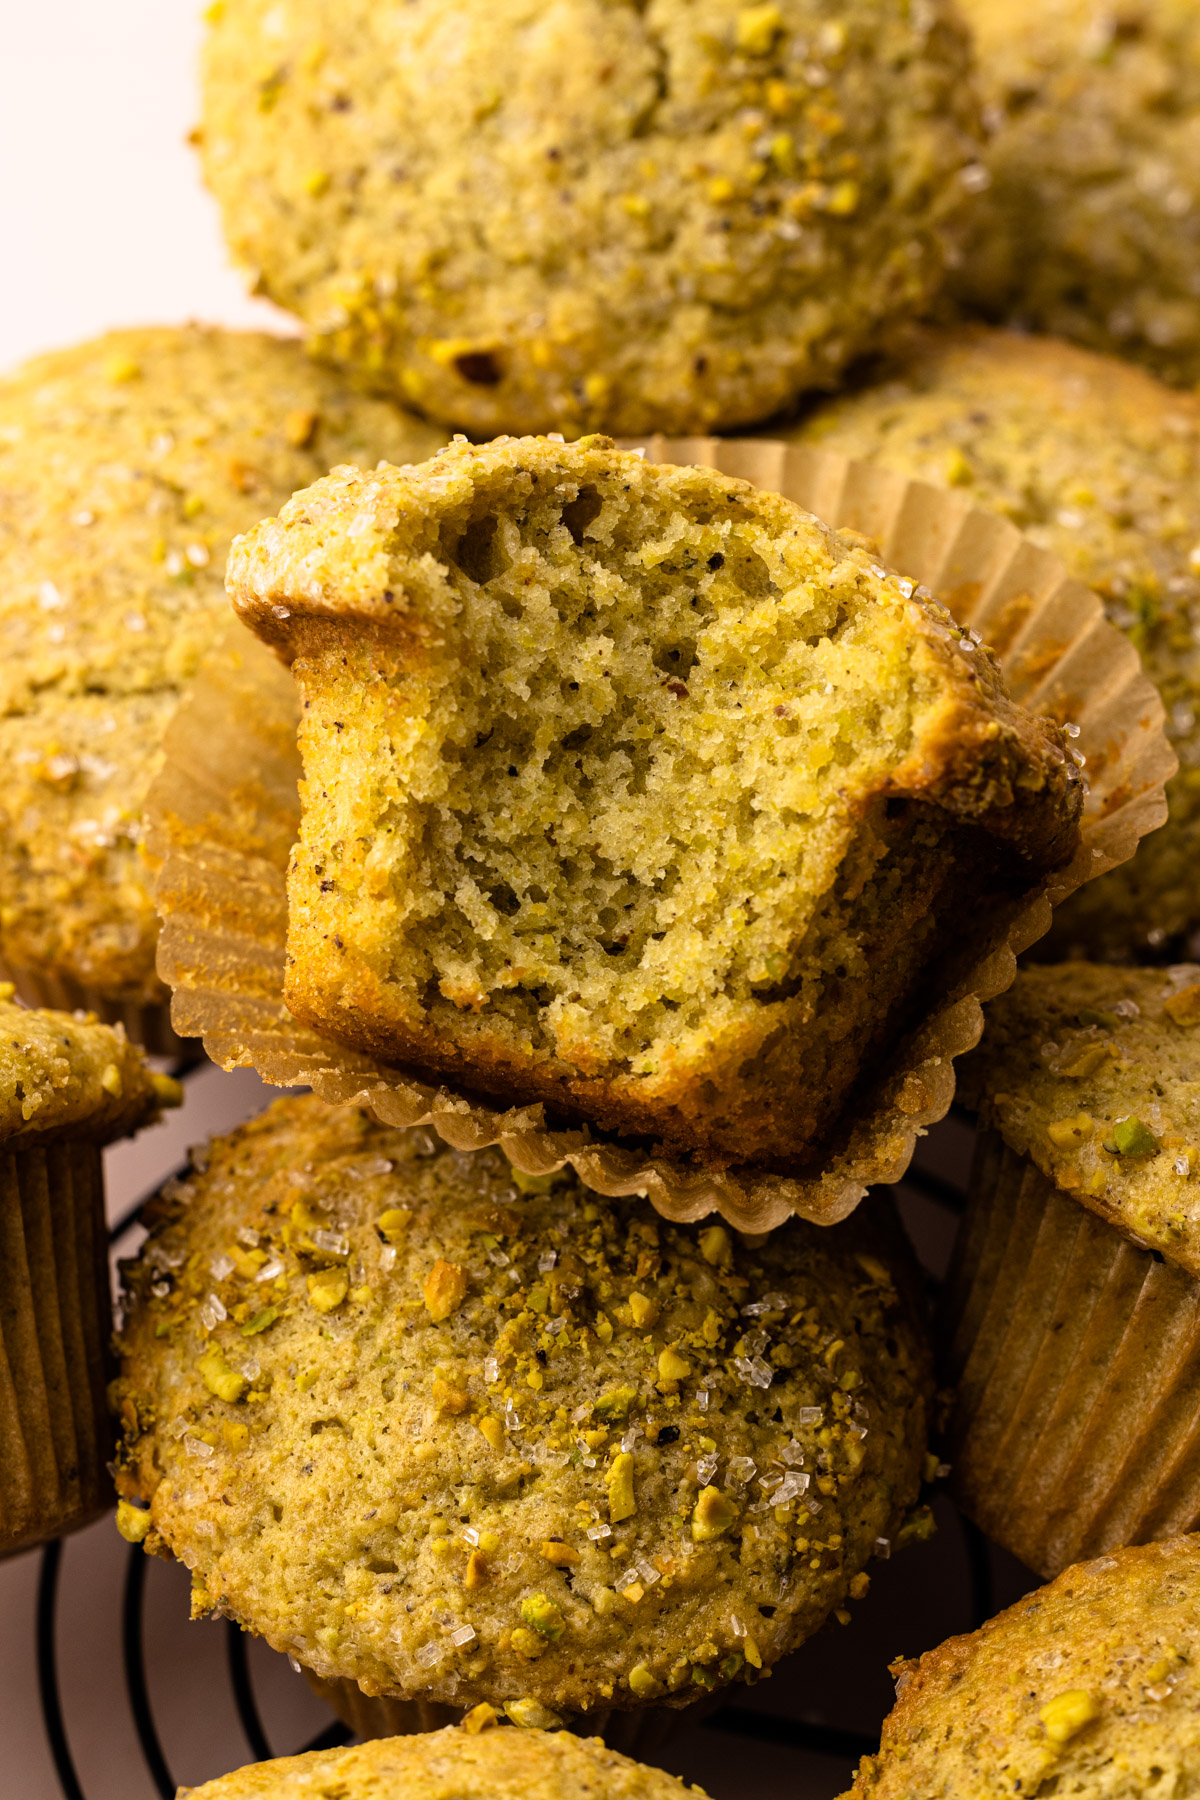 A from scratch pistachio muffin with a bite taken from it.